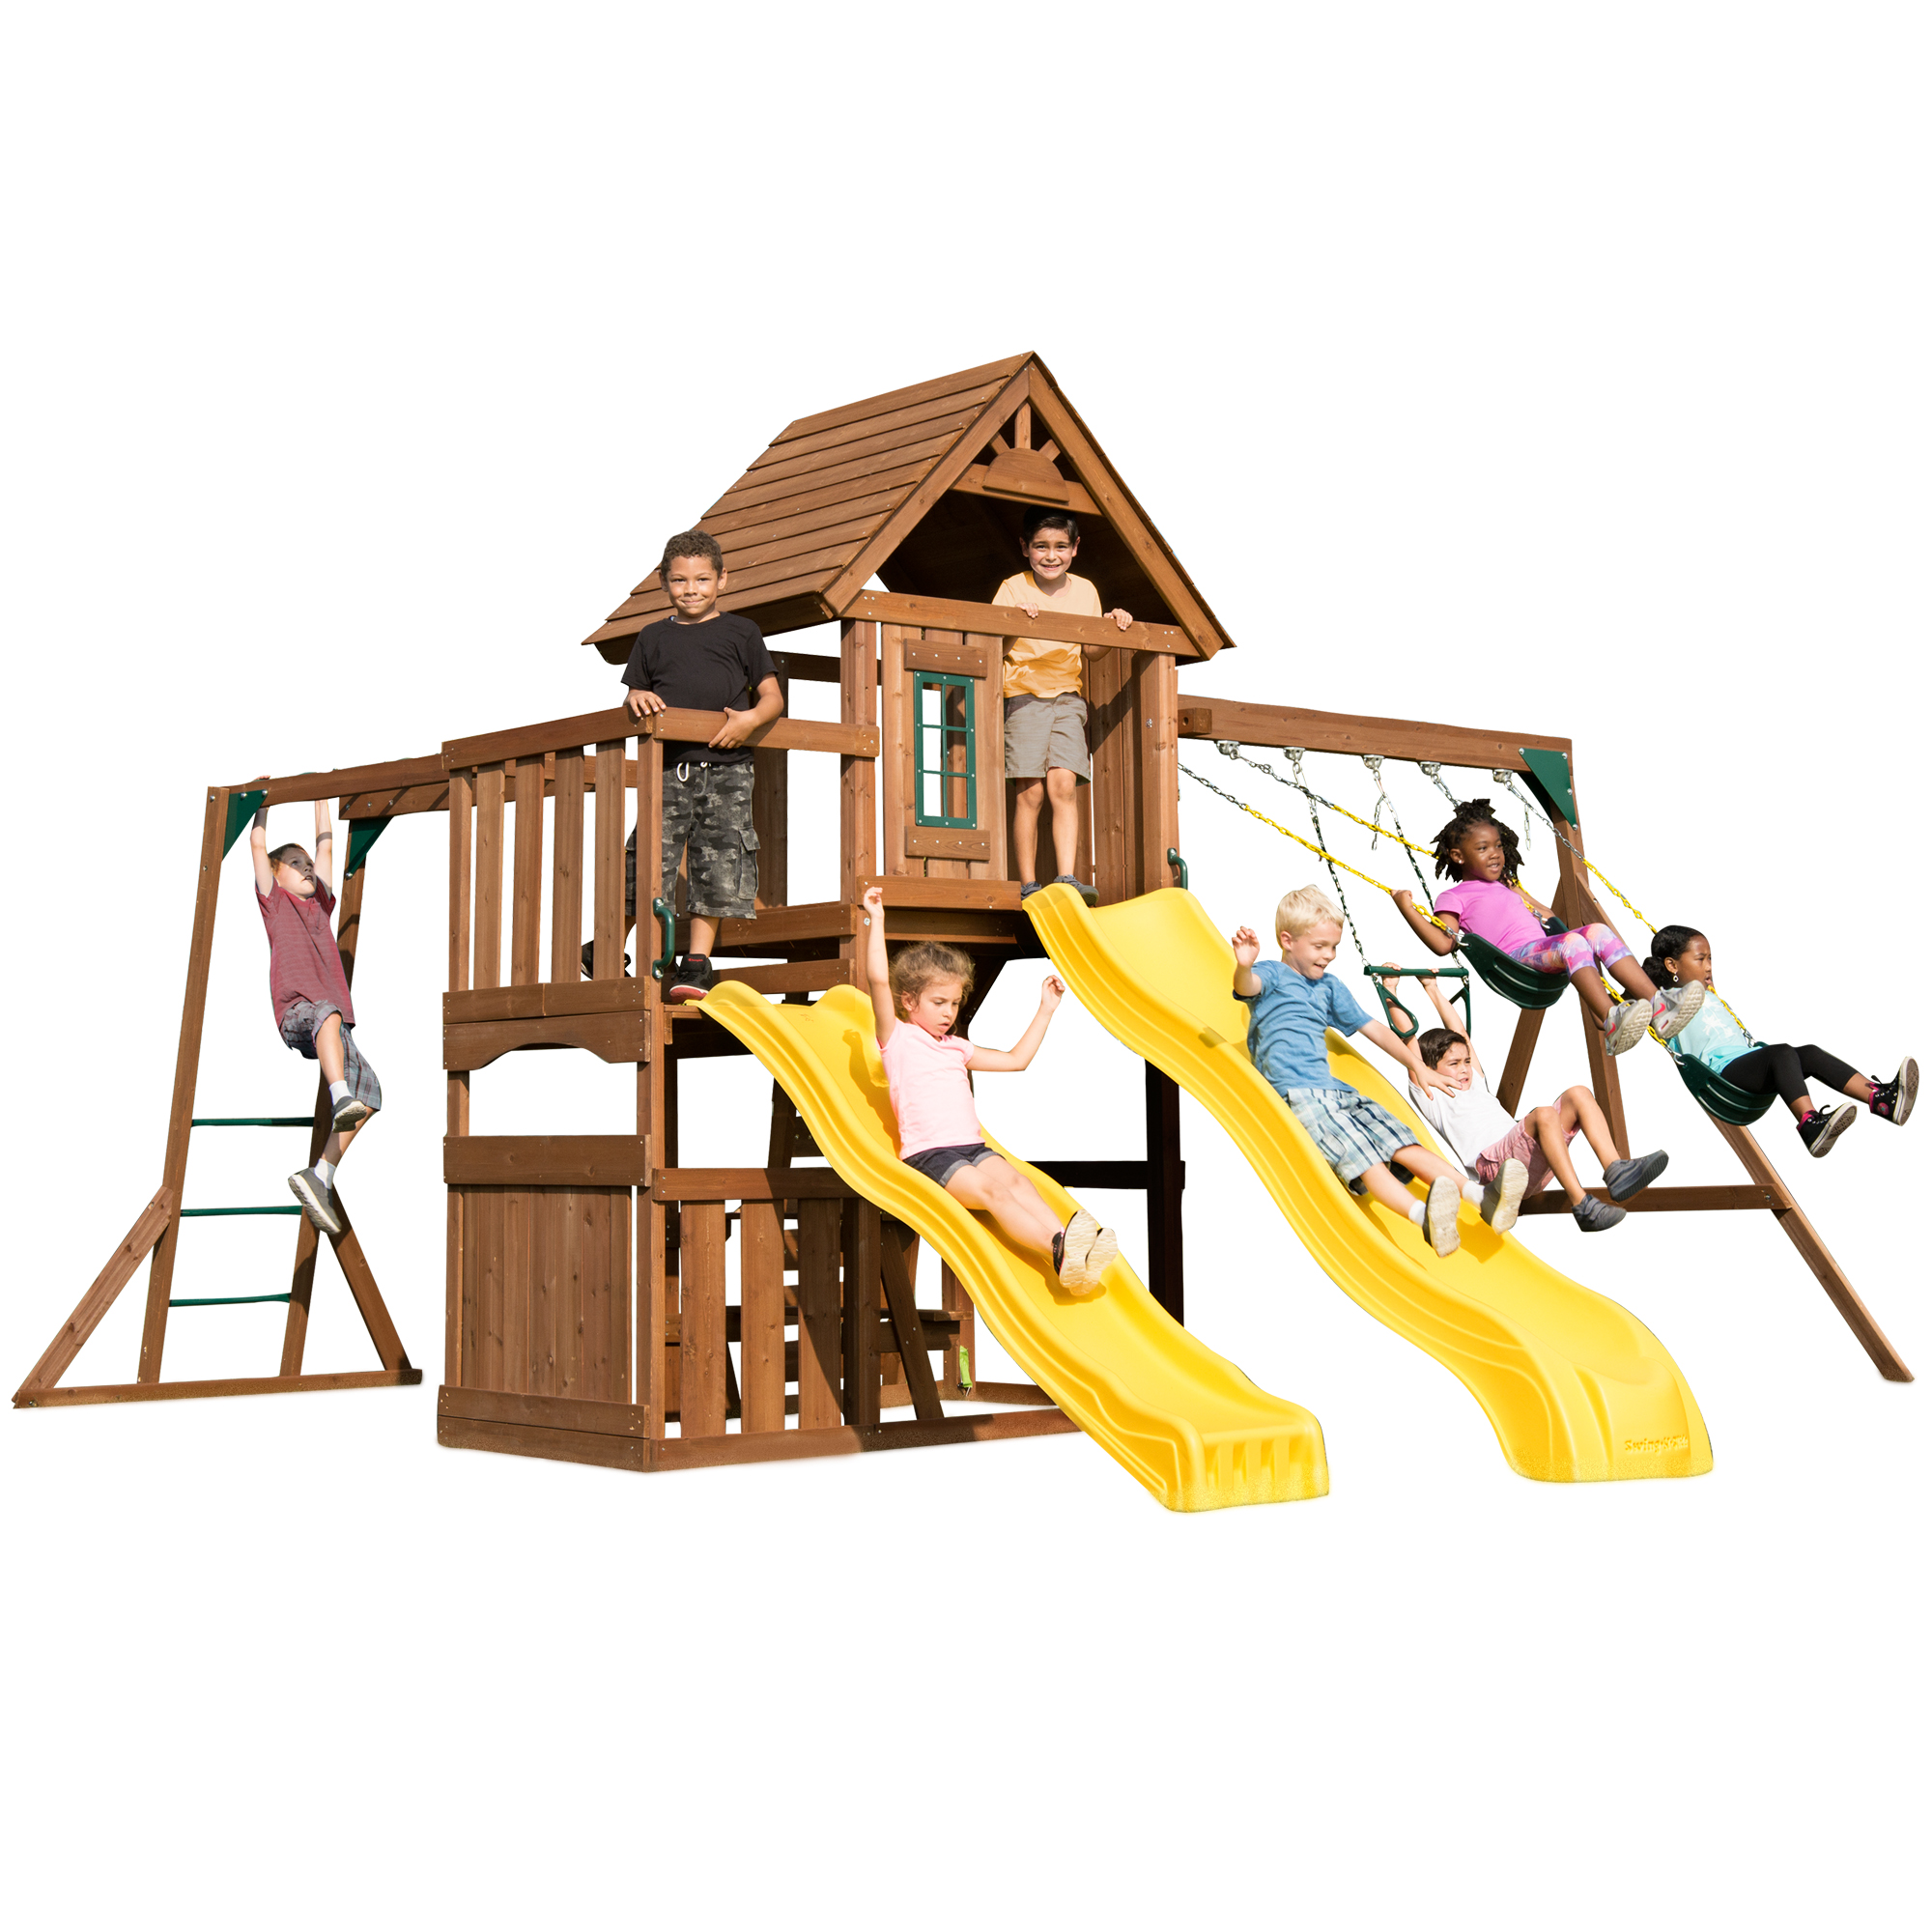 Swing-N-Slide Timberview Wooden Backyard Swing Set with Two Yellow Wave Slides, Wood Roof, Swings, and Monkey Bars - image 1 of 12